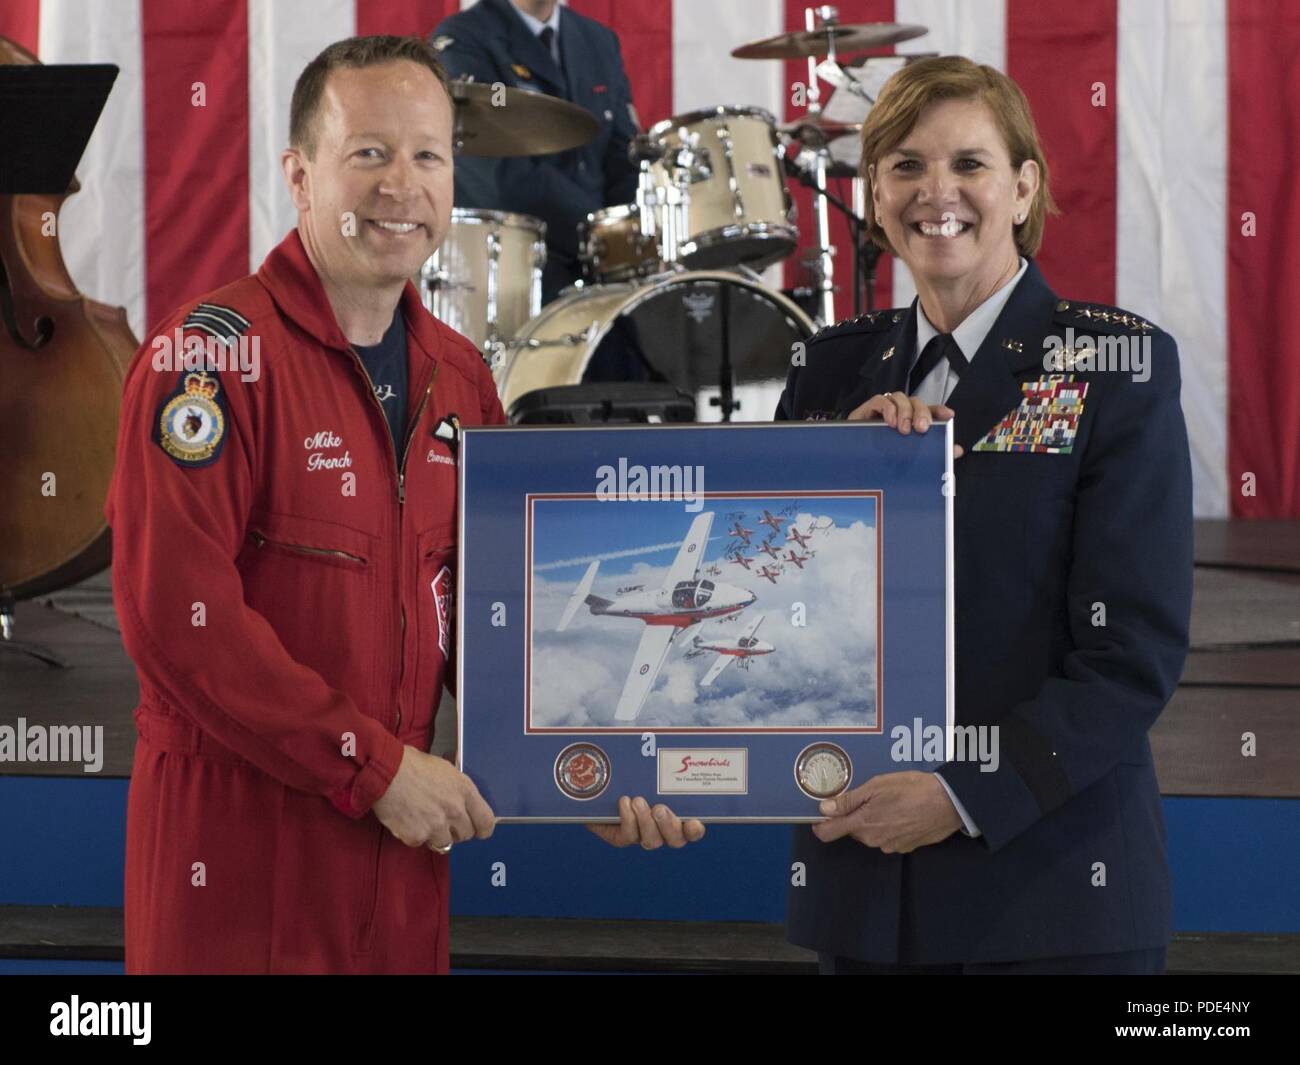 Lt. Col. Mike French (left), commander of the Royal Canadian Air Force’s Snowbirds, presents Gen. Lori J. Robinson, commander of North American Aerospace Defense Command and U.S. Northern Command, with a lithograph at the NORAD 60th Anniversary Ceremony on Peterson Air Force Base Colorado, May 12, 2018. The ceremony and static display of various NORAD aircraft was the culmination of a three-day event, which included a media tour of Cheyenne Mountain Air Force Station, the dedication of a cairn outside the commands' headquarters building memorializing the Canadians who have passed away while se Stock Photo